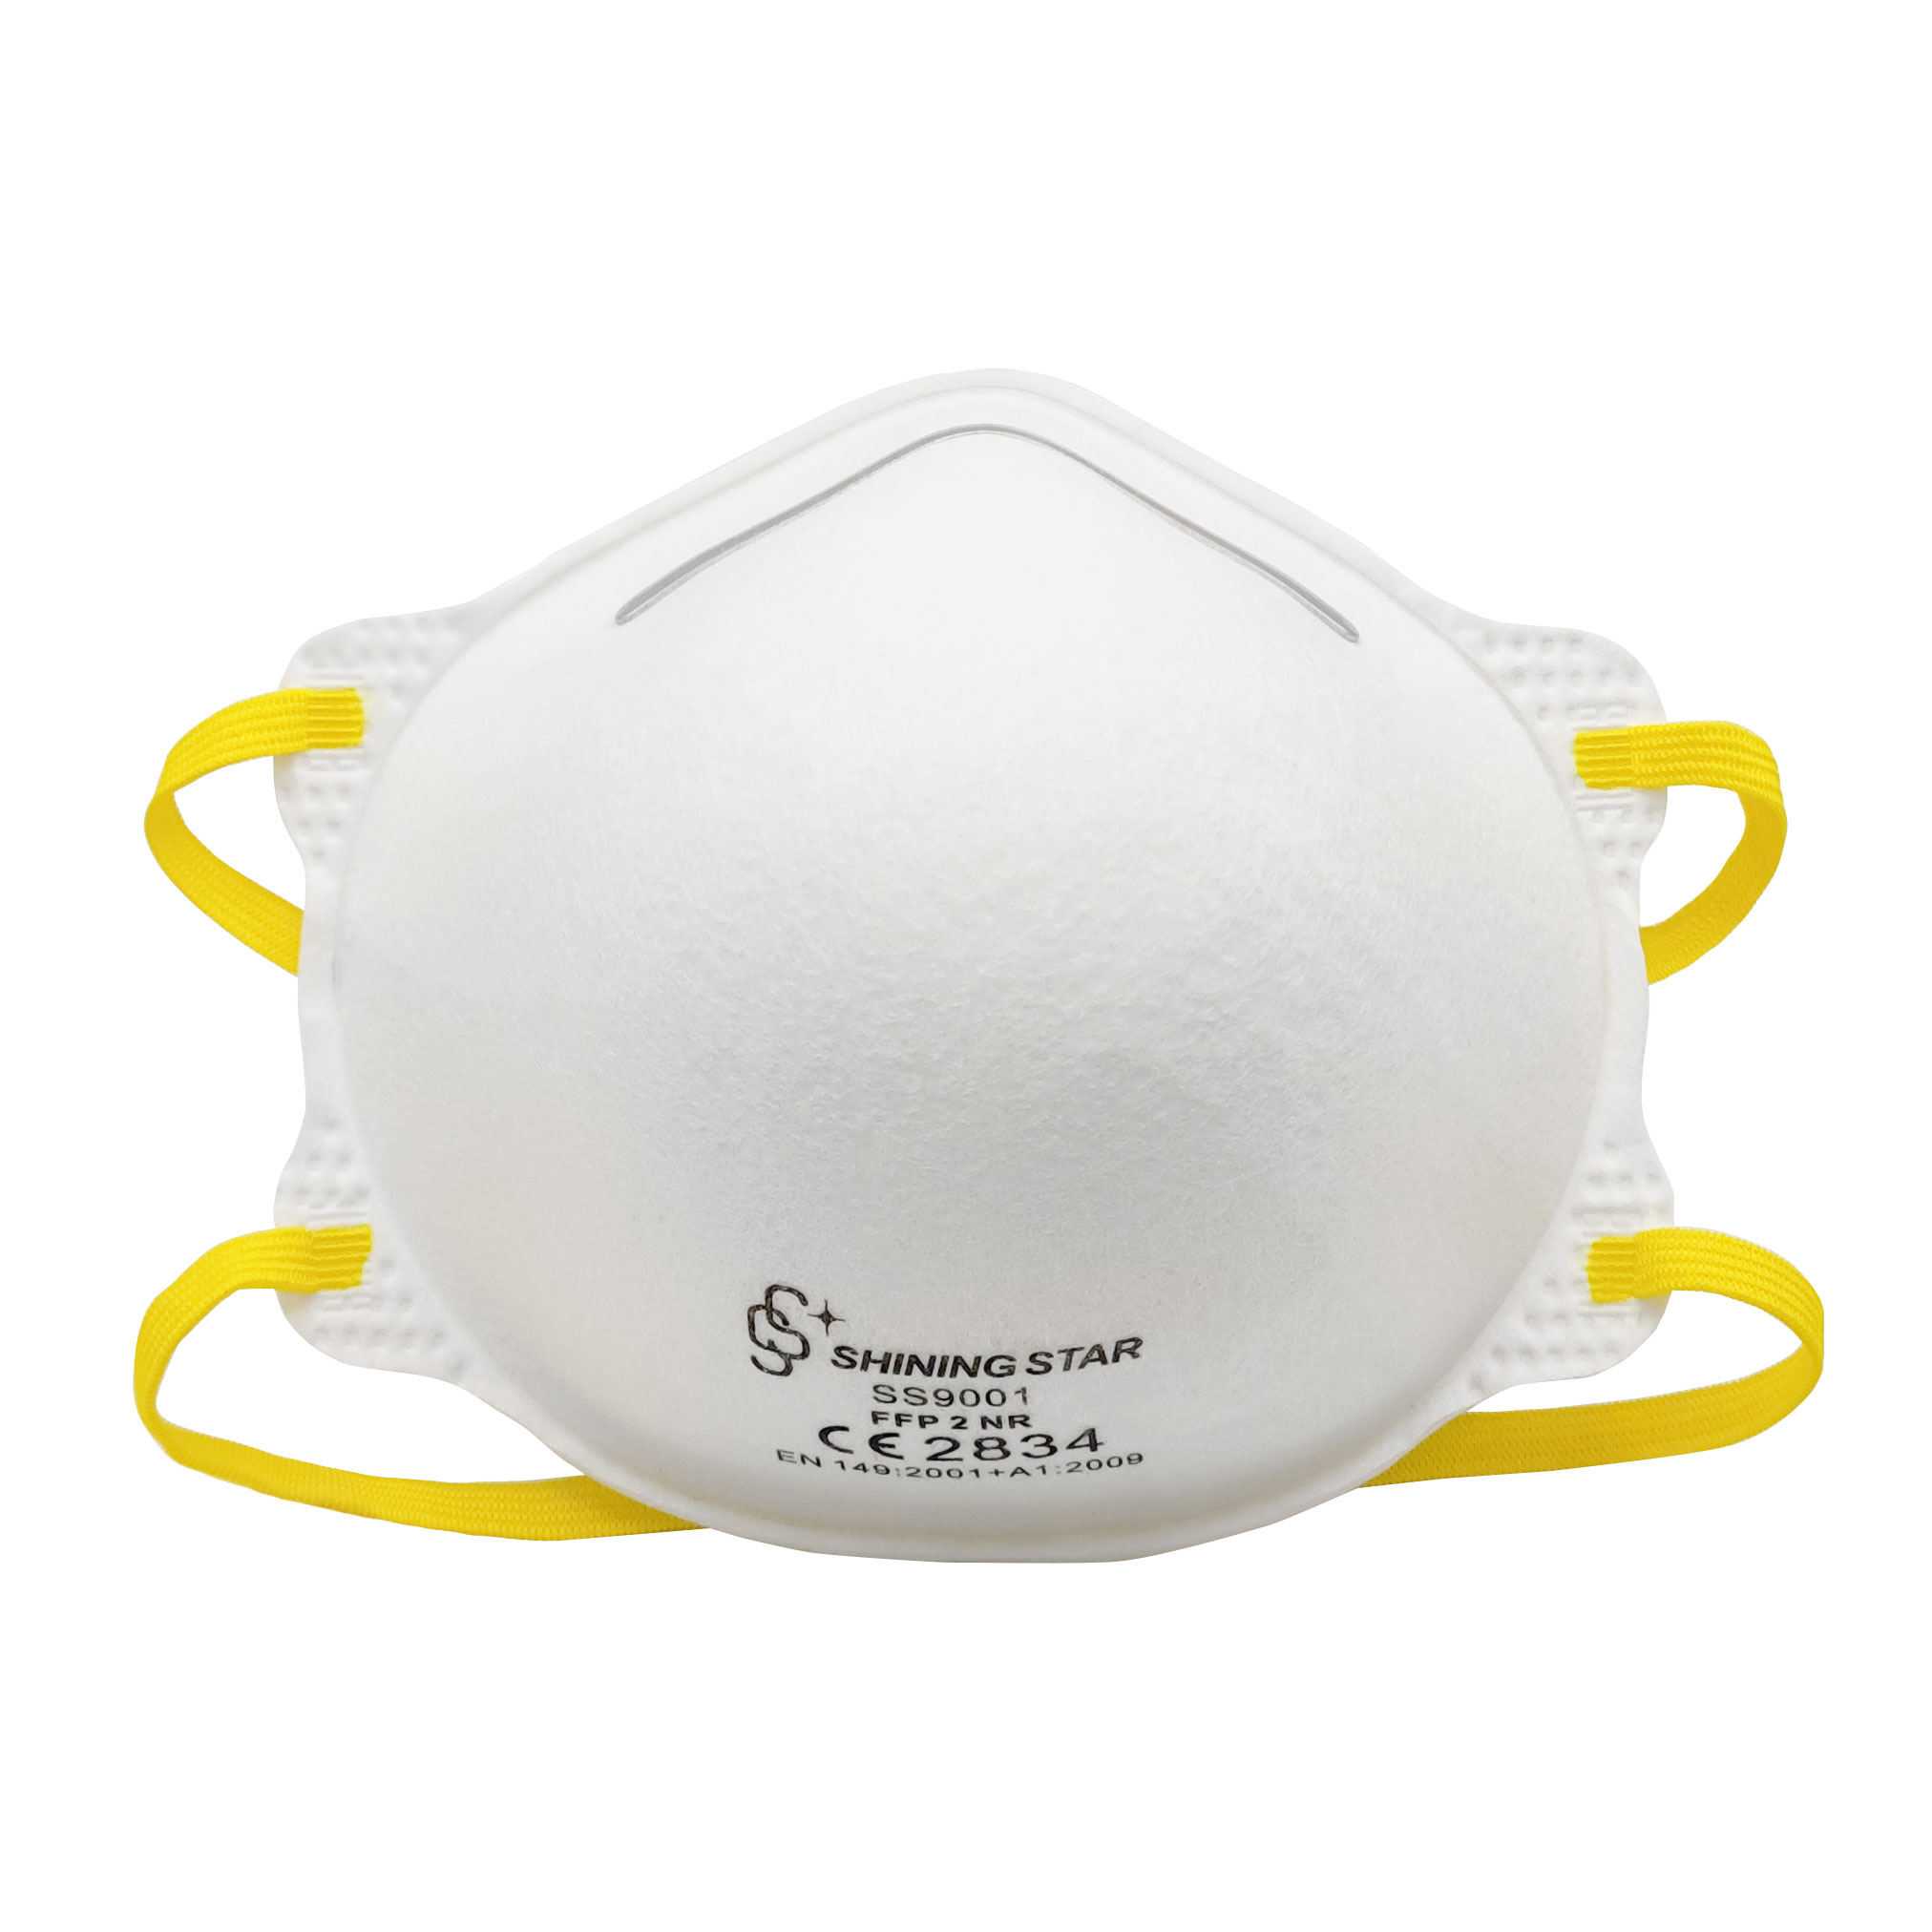 High Quality for Ffp2 Dust Mask - SS9001-FFP2 Disposable Particulate Respirator – Shining Star